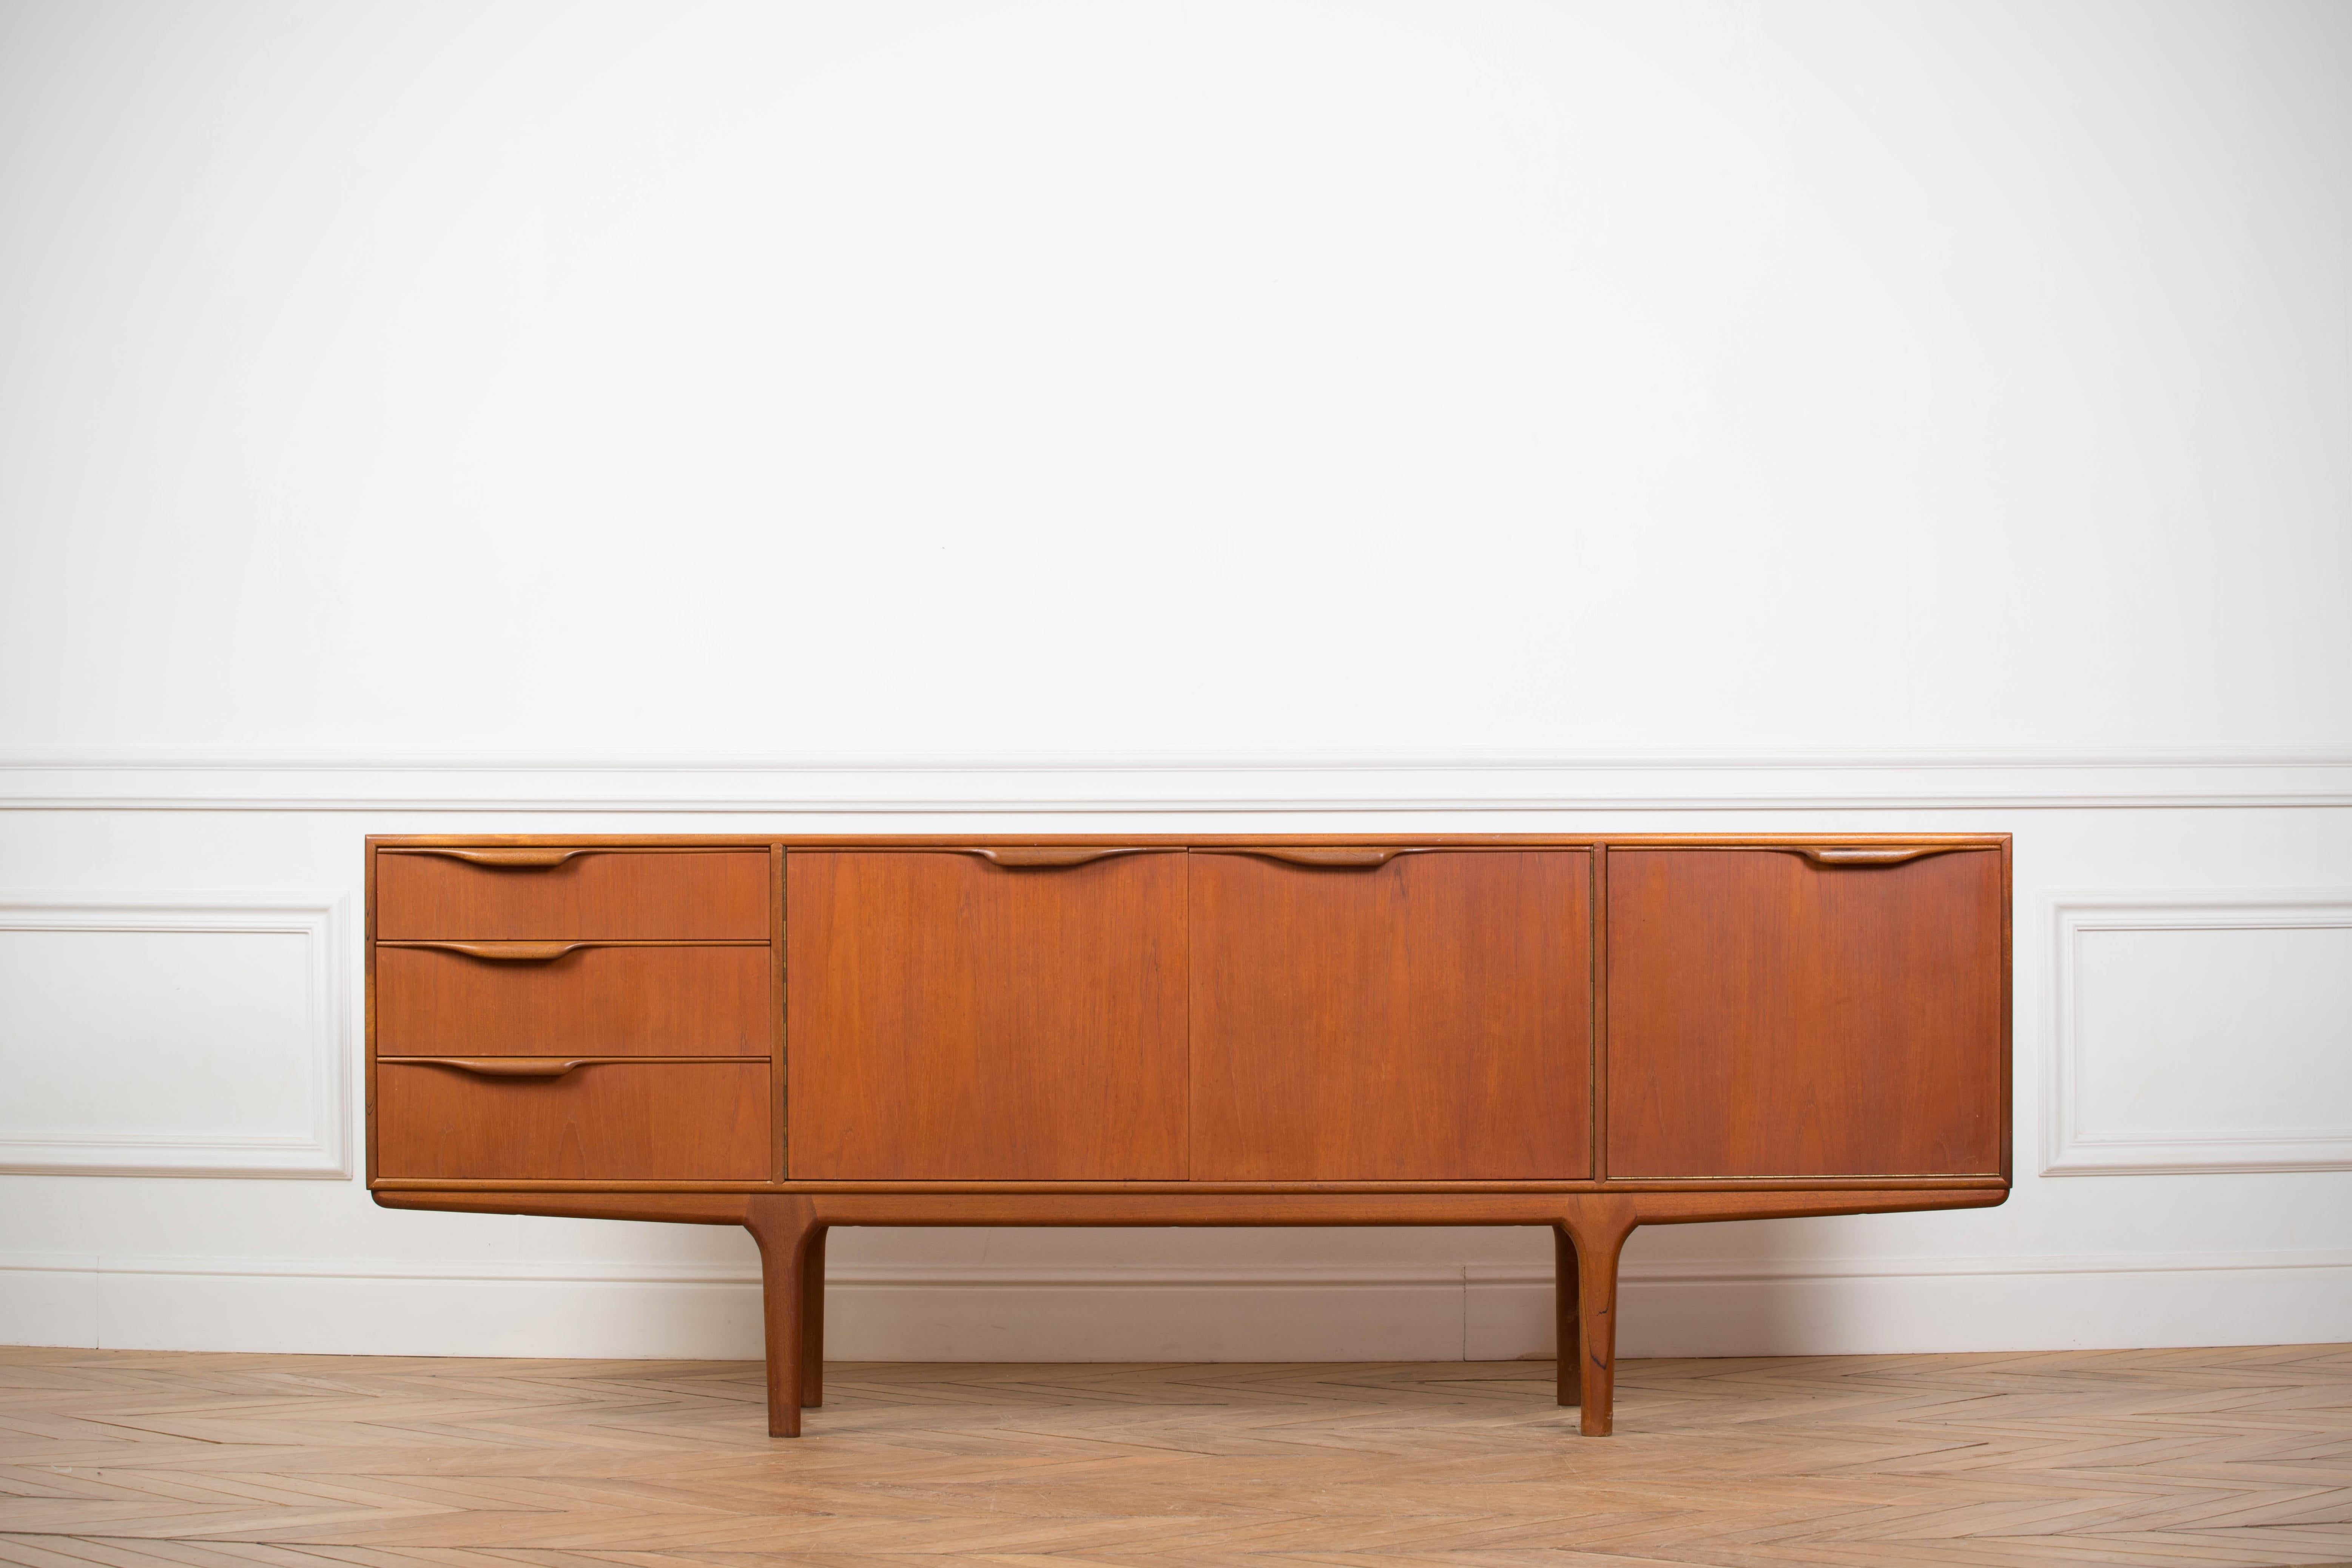 Stunning and beautifully crafted teak sideboard designed by Tom Robertson and manufactured by A.H. McIntosh of Kirkaldy, Scotland, 1960s. 
A.H. McIntosh created quality furniture which catered to the tastes of progressive 1960s middle class